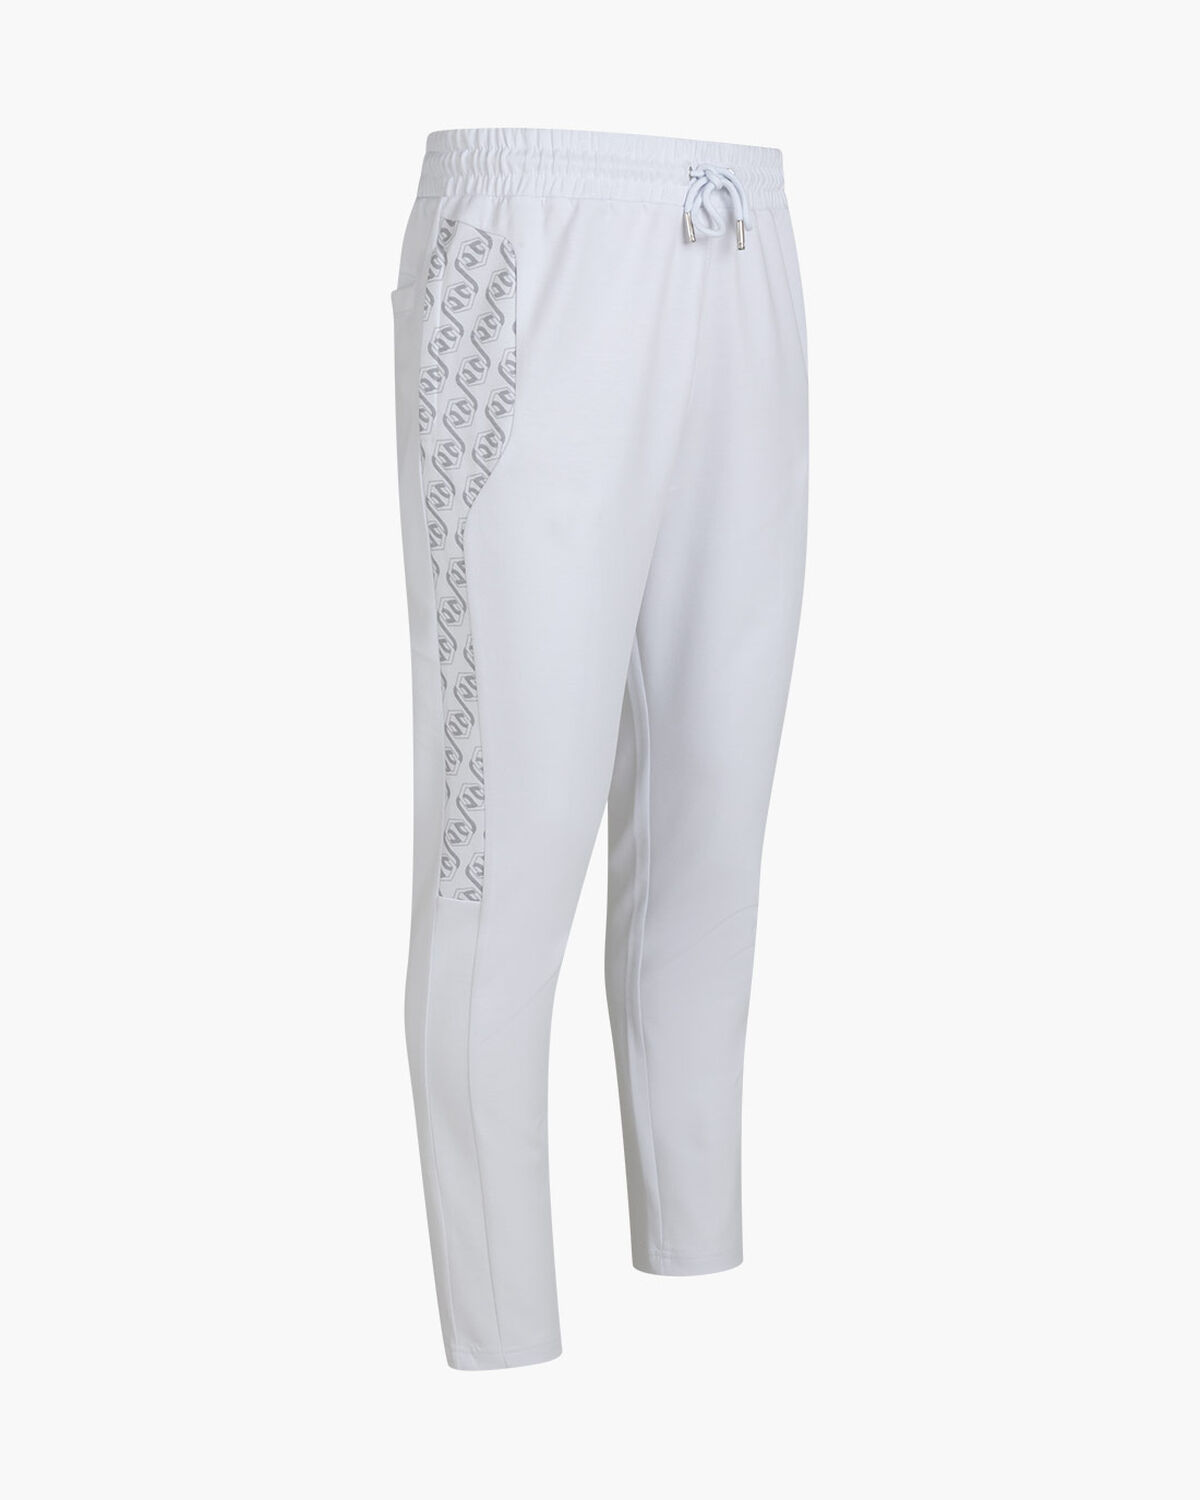 Chain Repeat Pants, White/Silver, hi-res